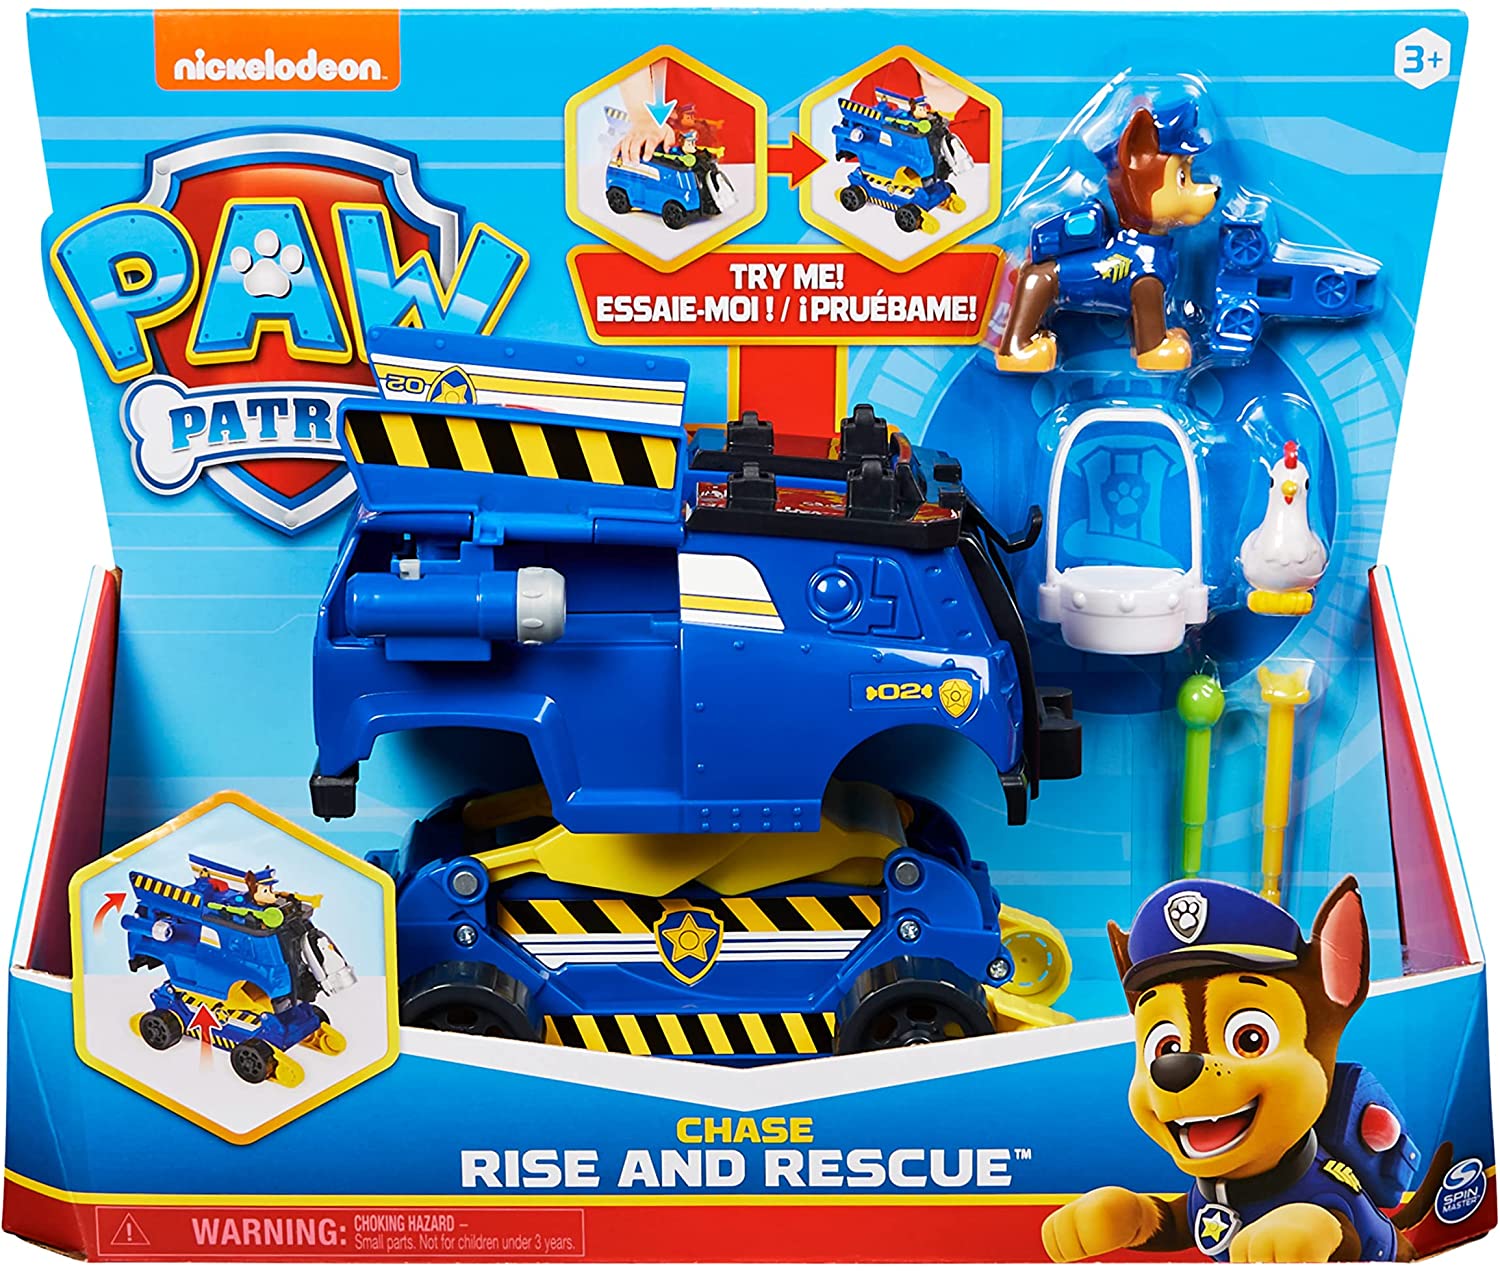 Pat patrouille chase rise and Rescue paw patrol 20136012